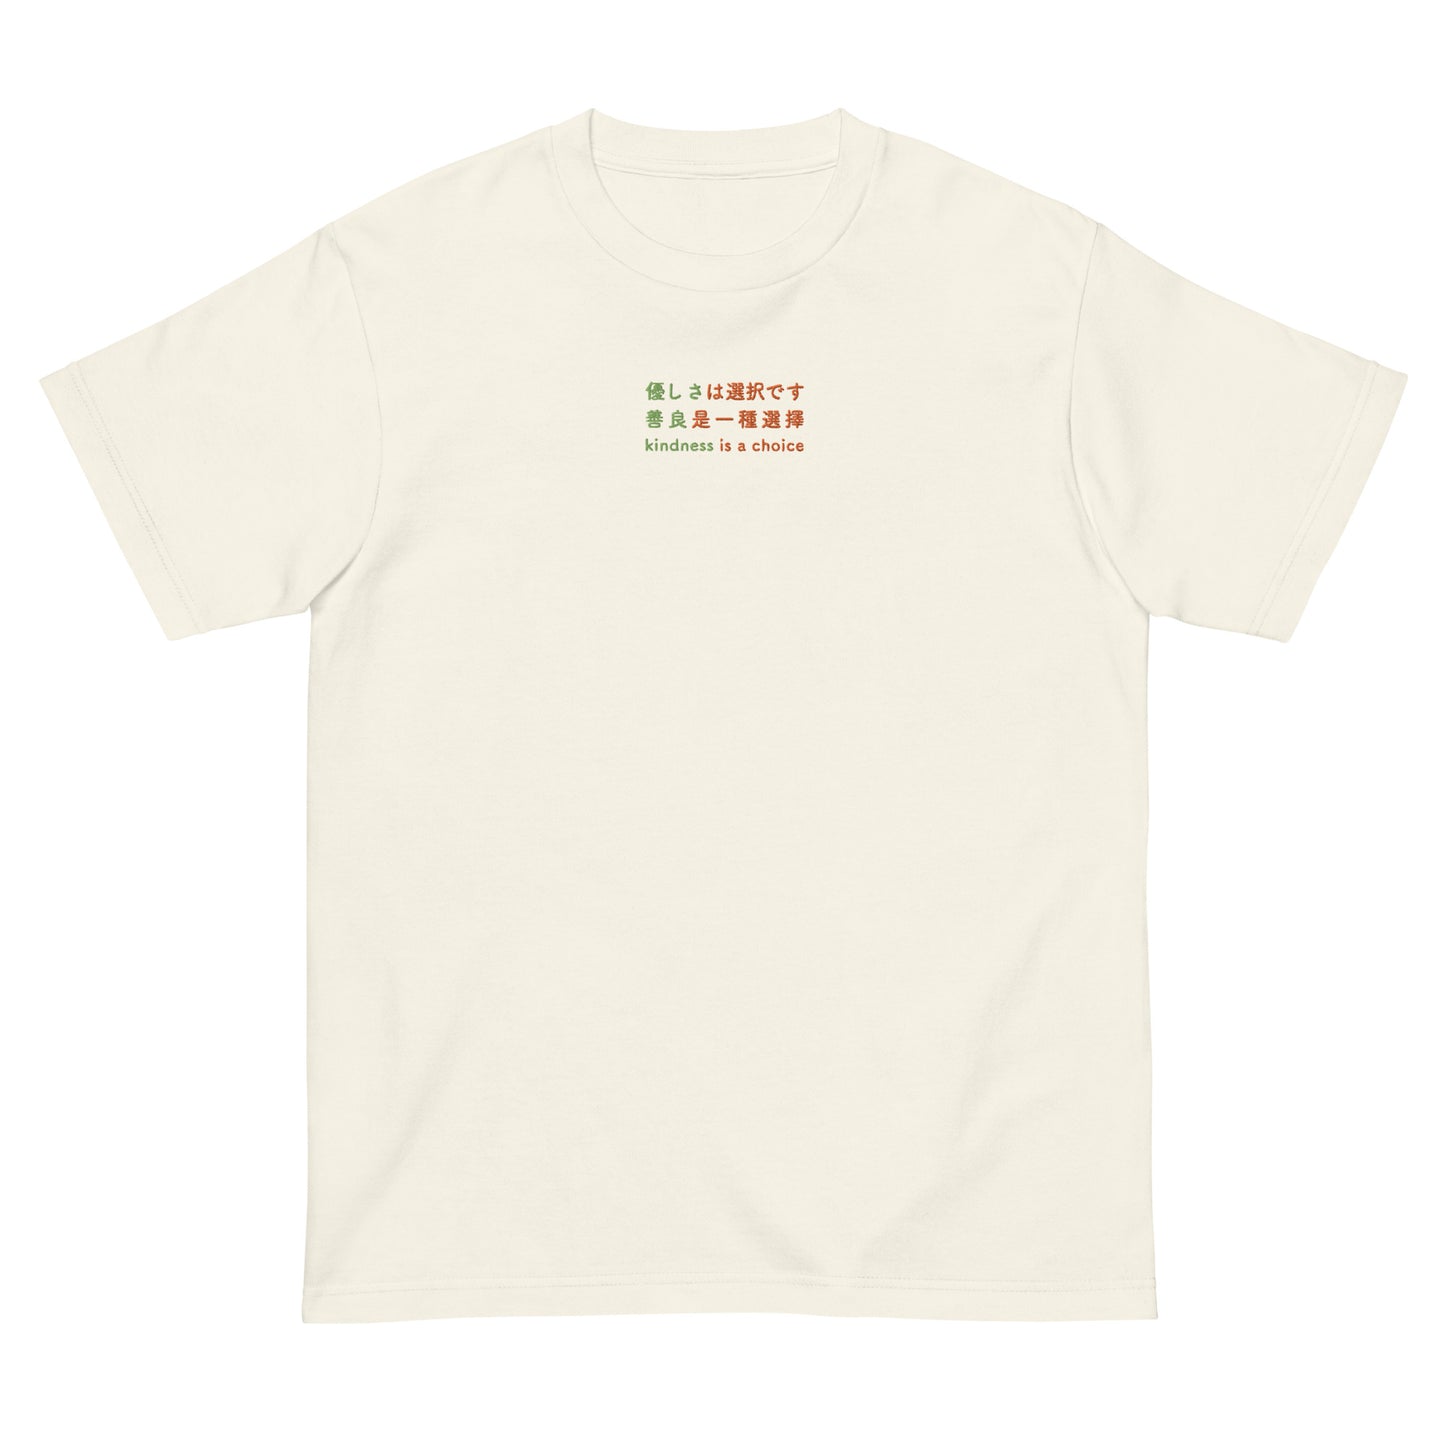 Ivory High Quality Tee - Front Design with an Green, Orange Embroidery "Kindness is a Choice" in Japanese,Chinese and English